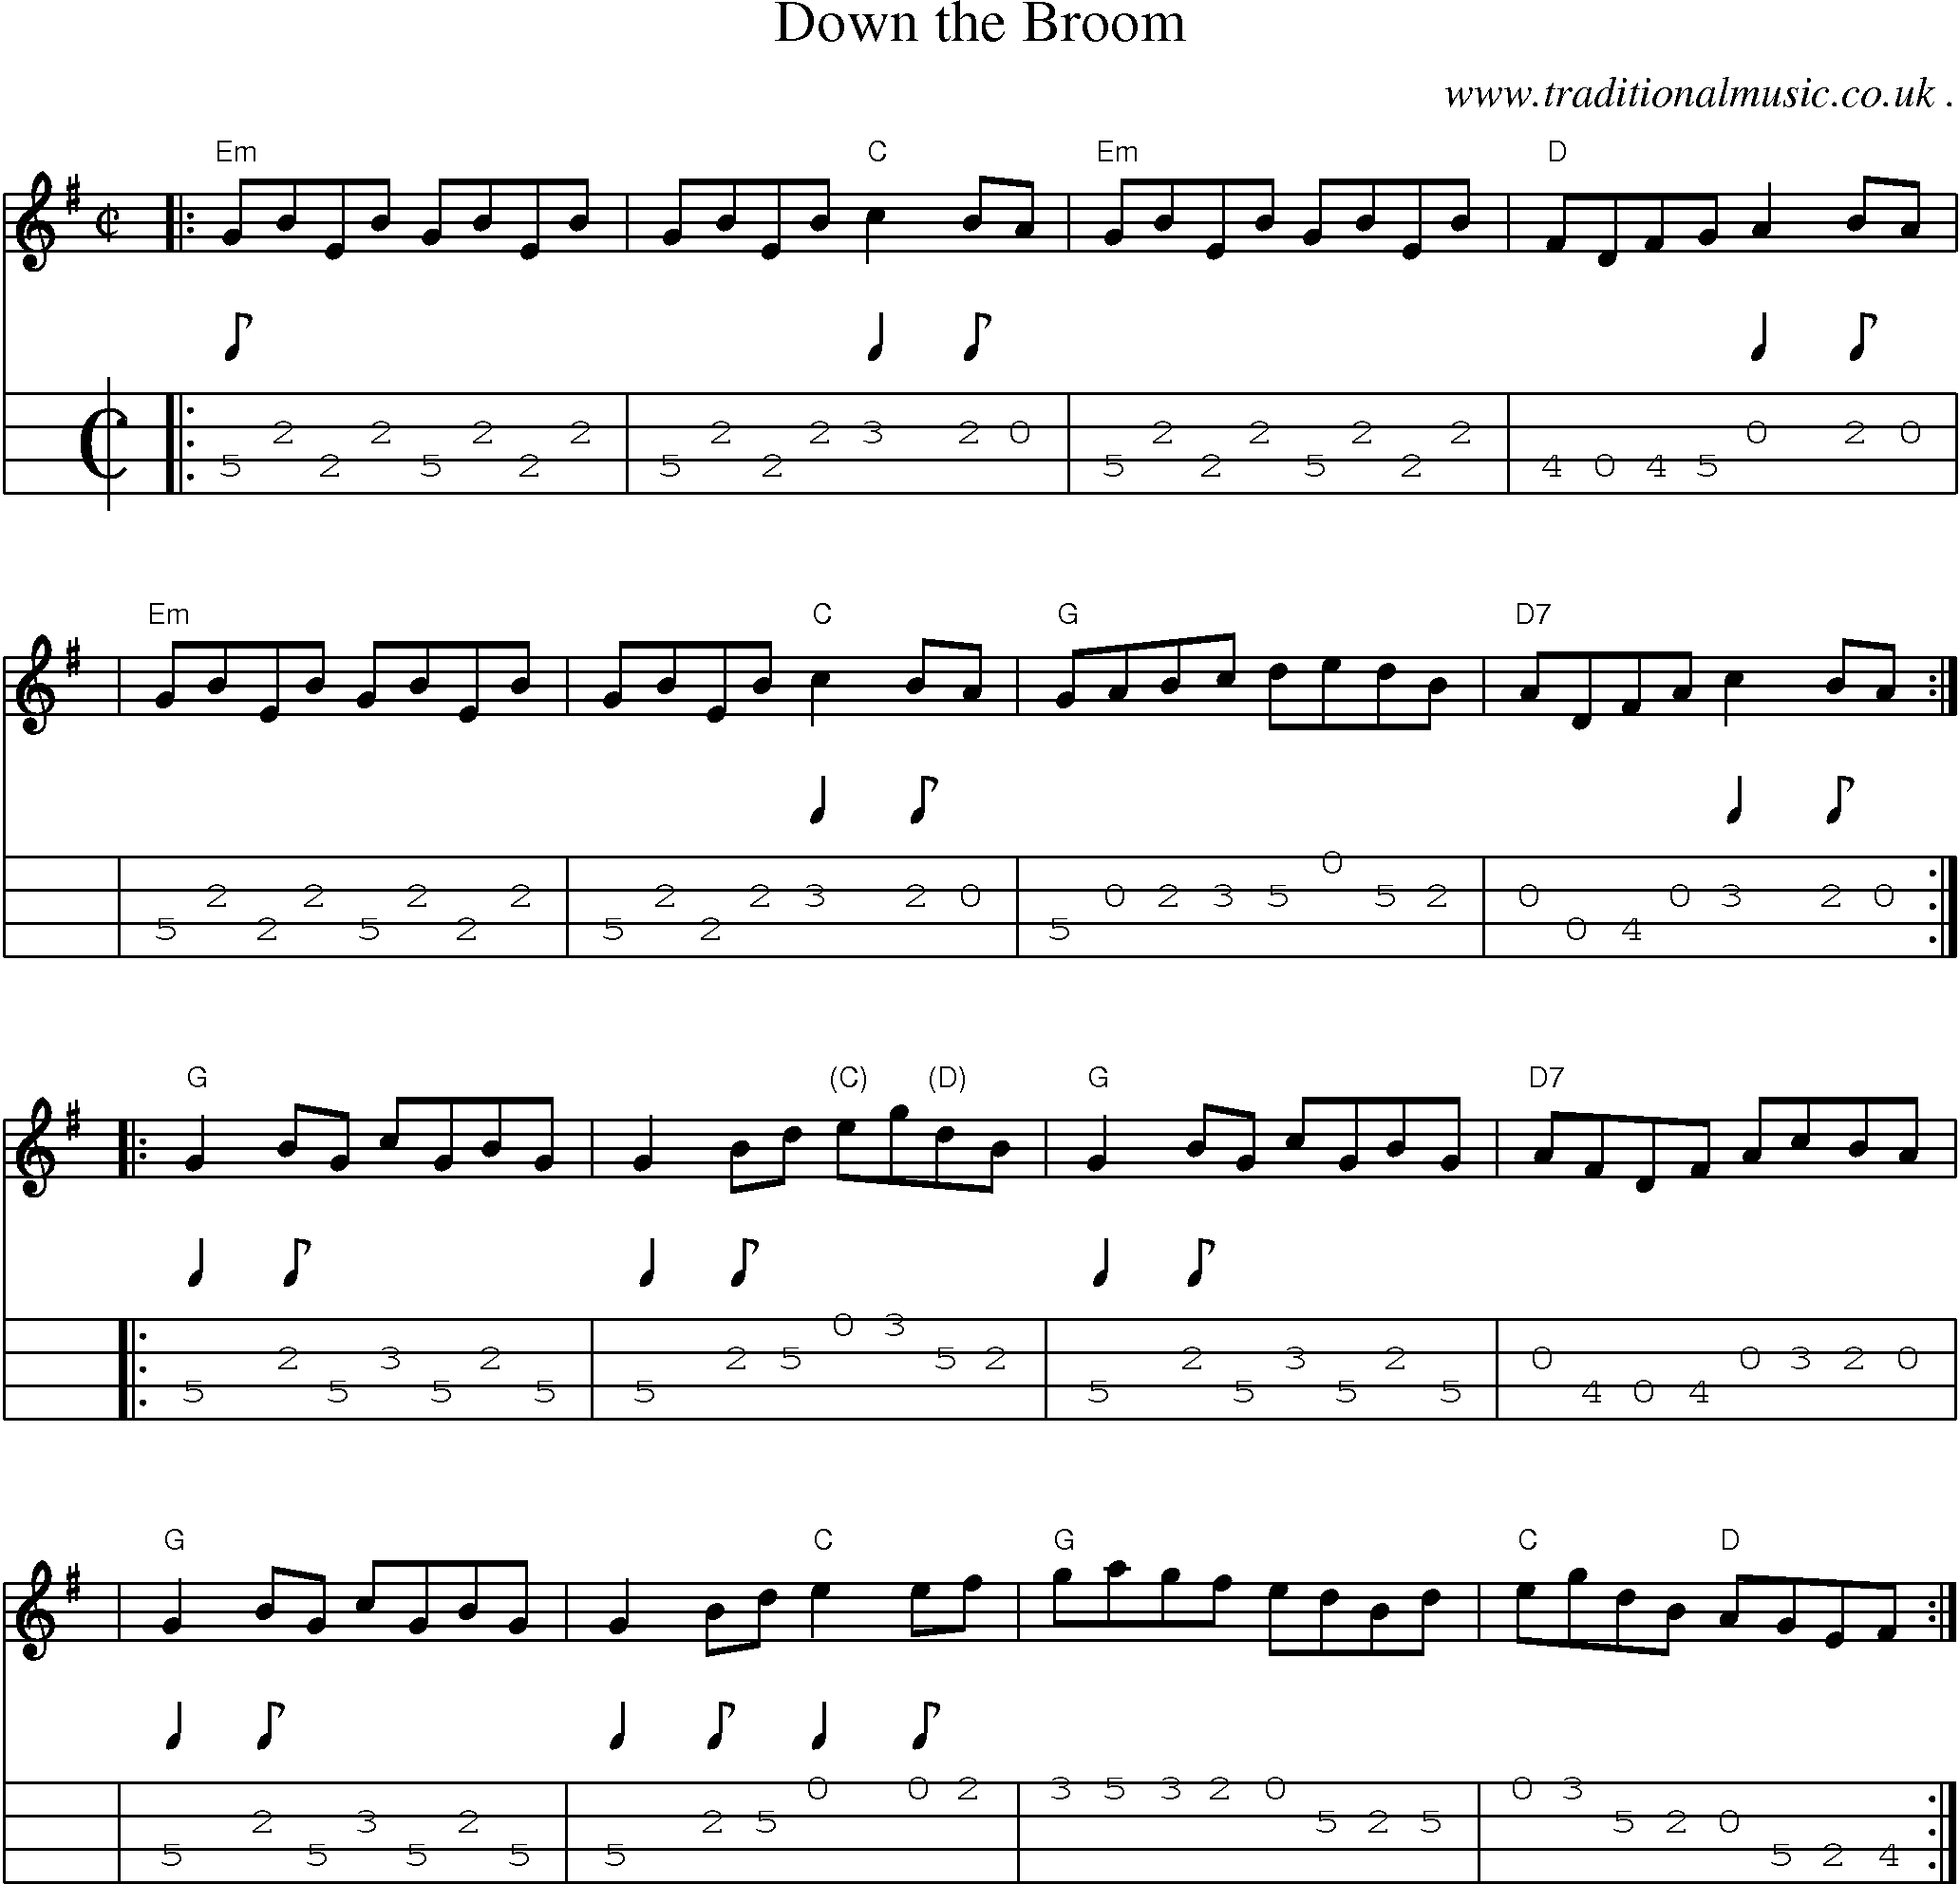 Sheet-music  score, Chords and Mandolin Tabs for Down The Broom